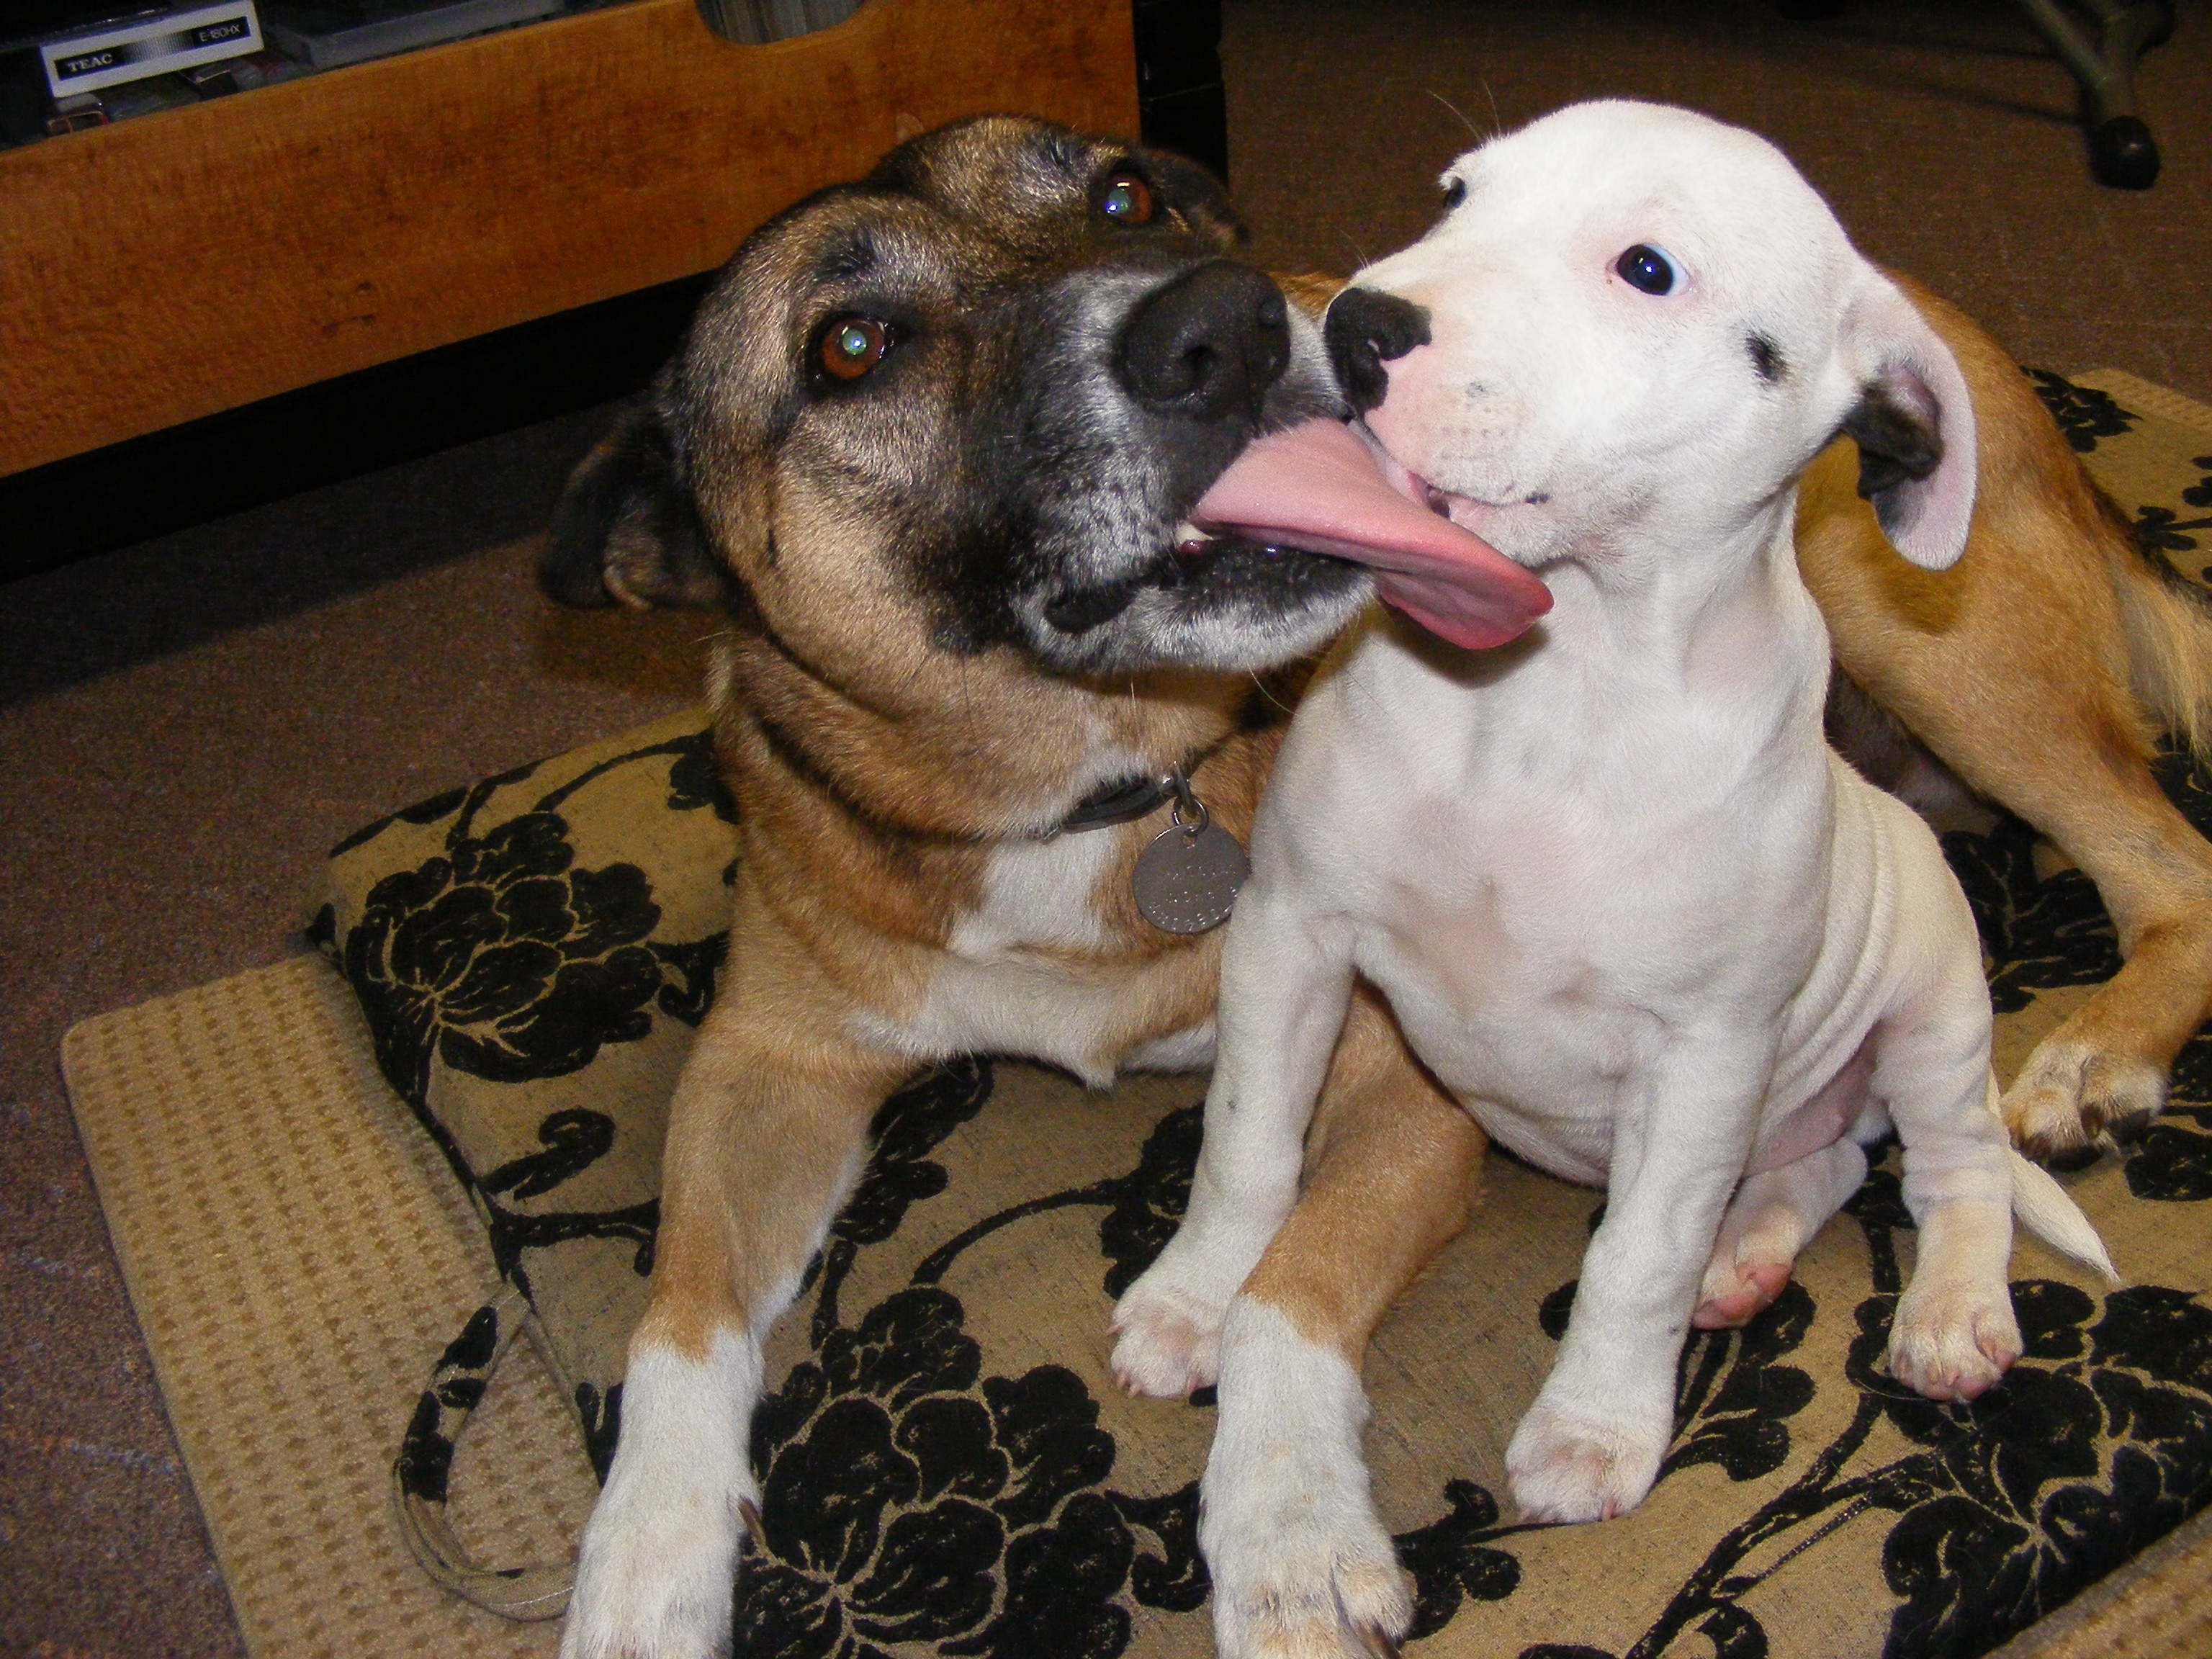 Licking the staffy pup